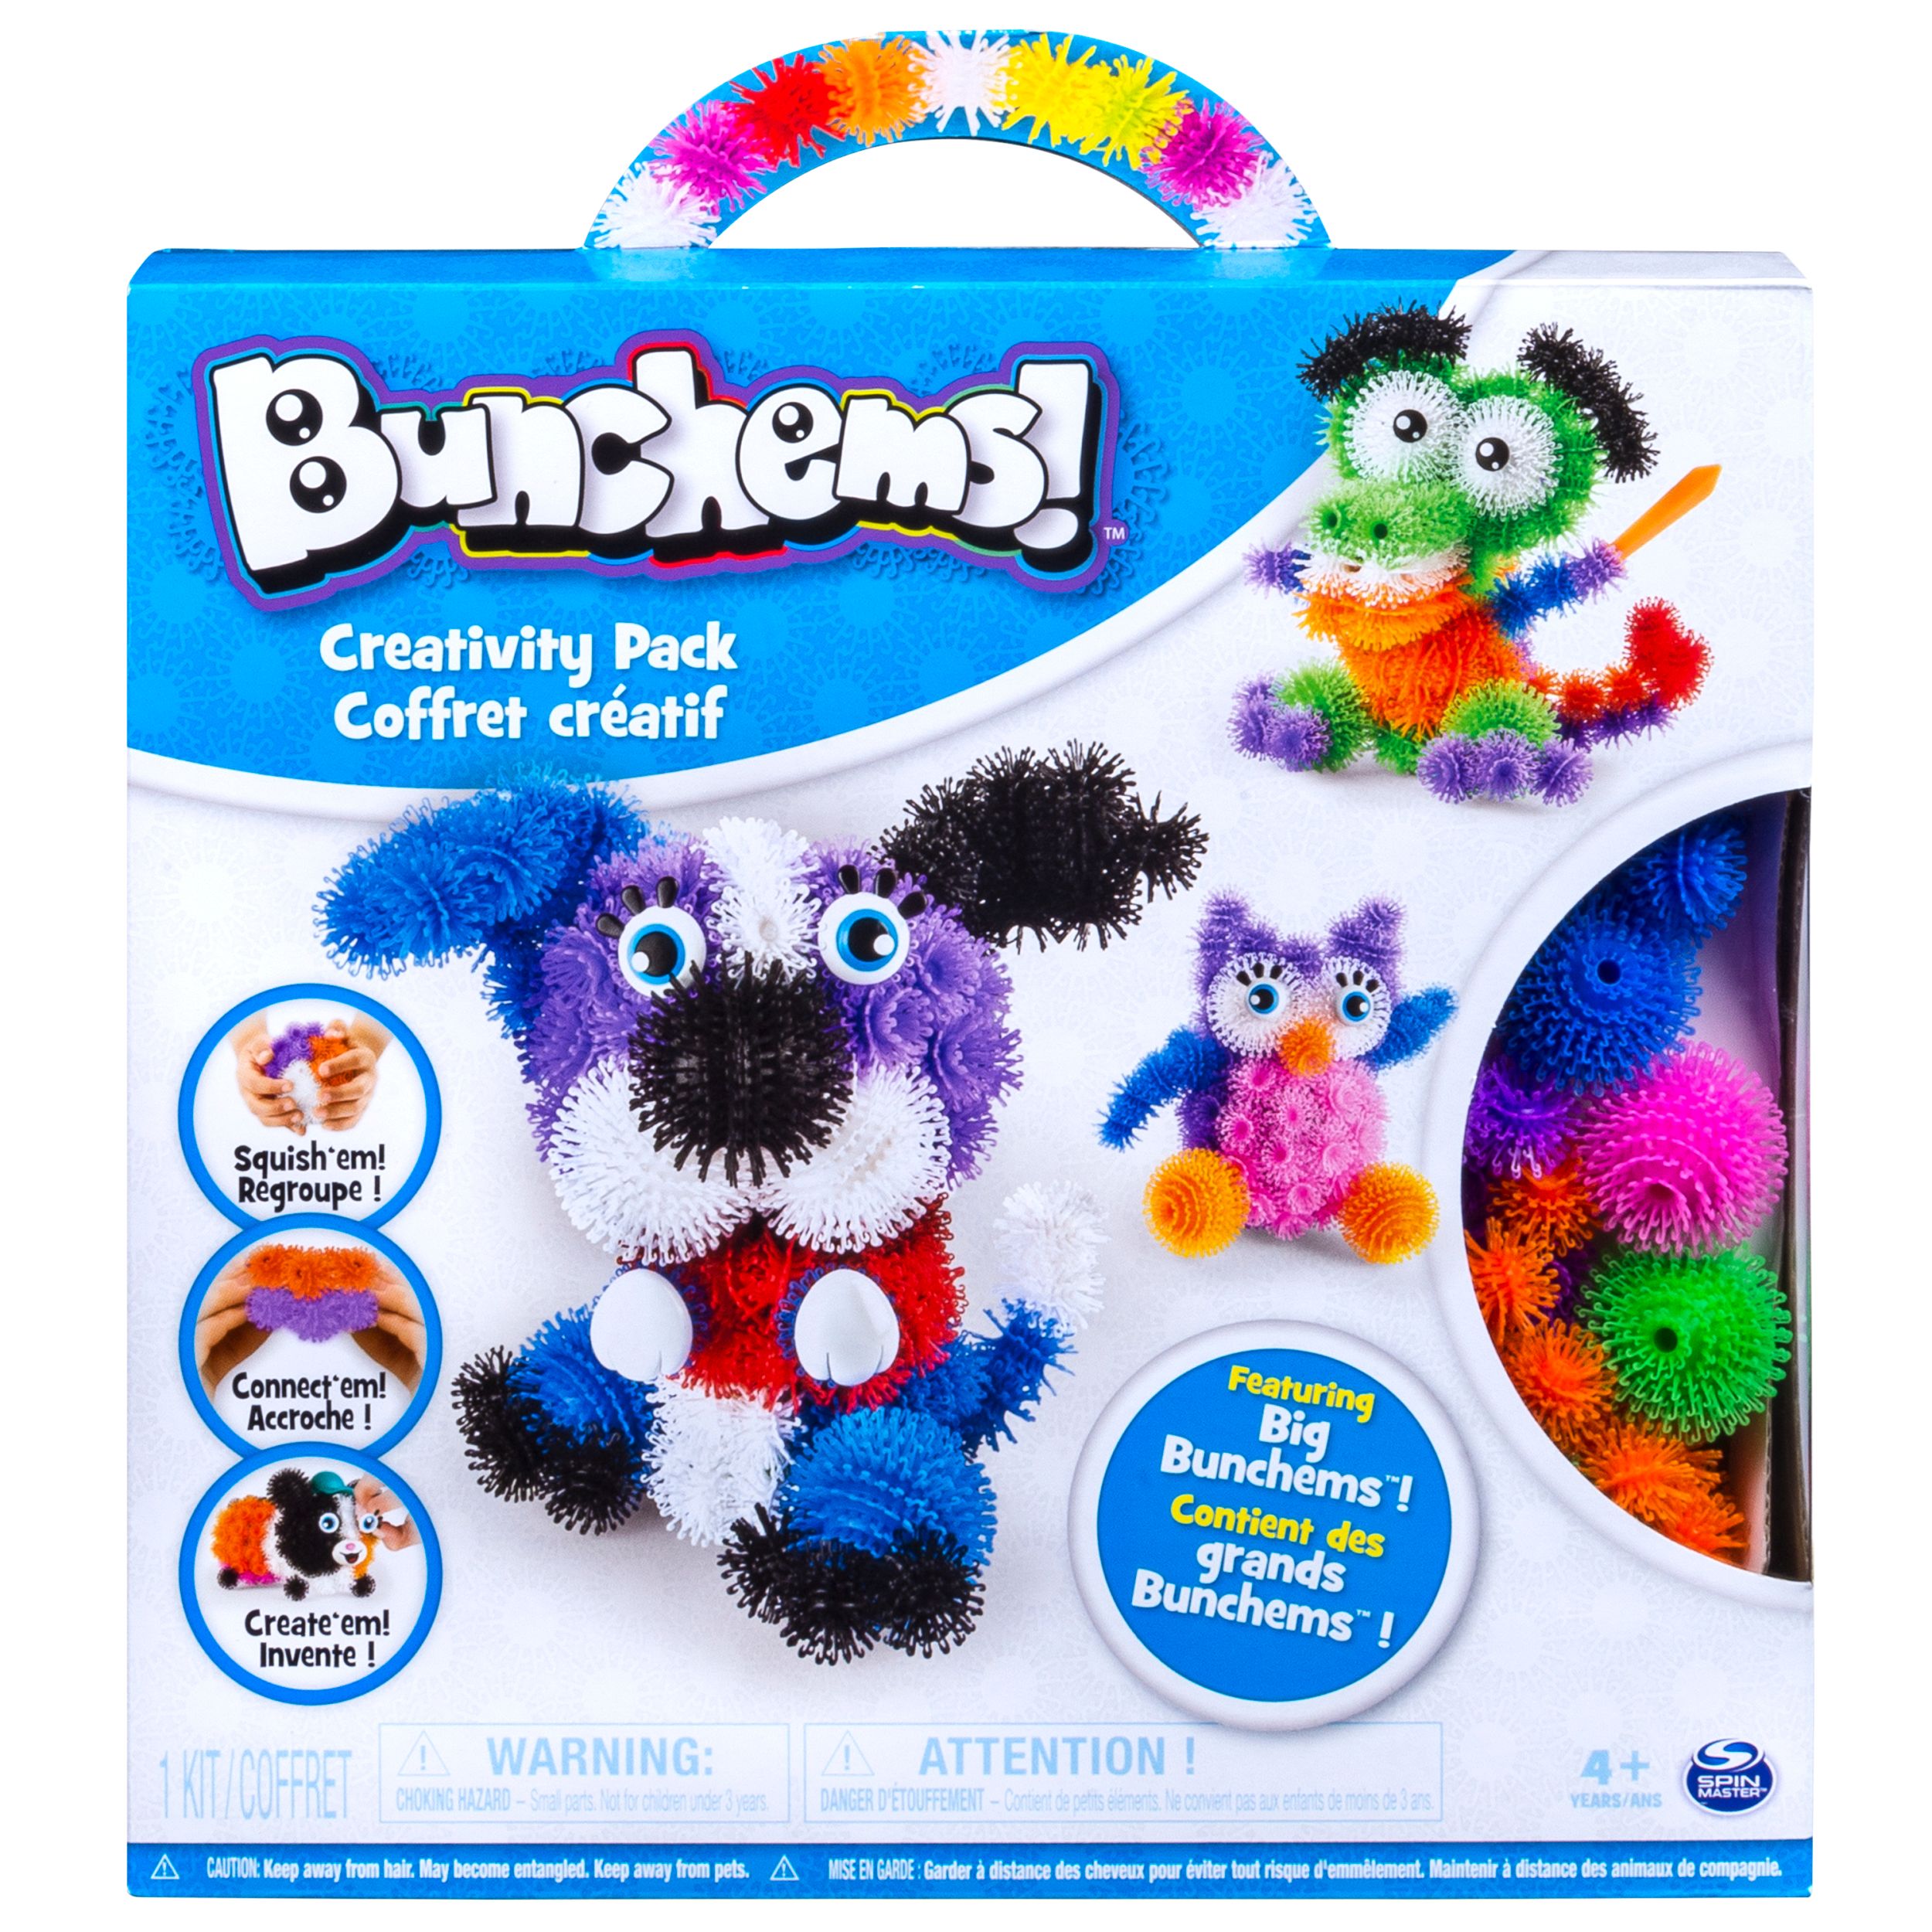 Bunchems - Creativity Pack featuring Big Bunchems and 350+ Pieces - image 1 of 8